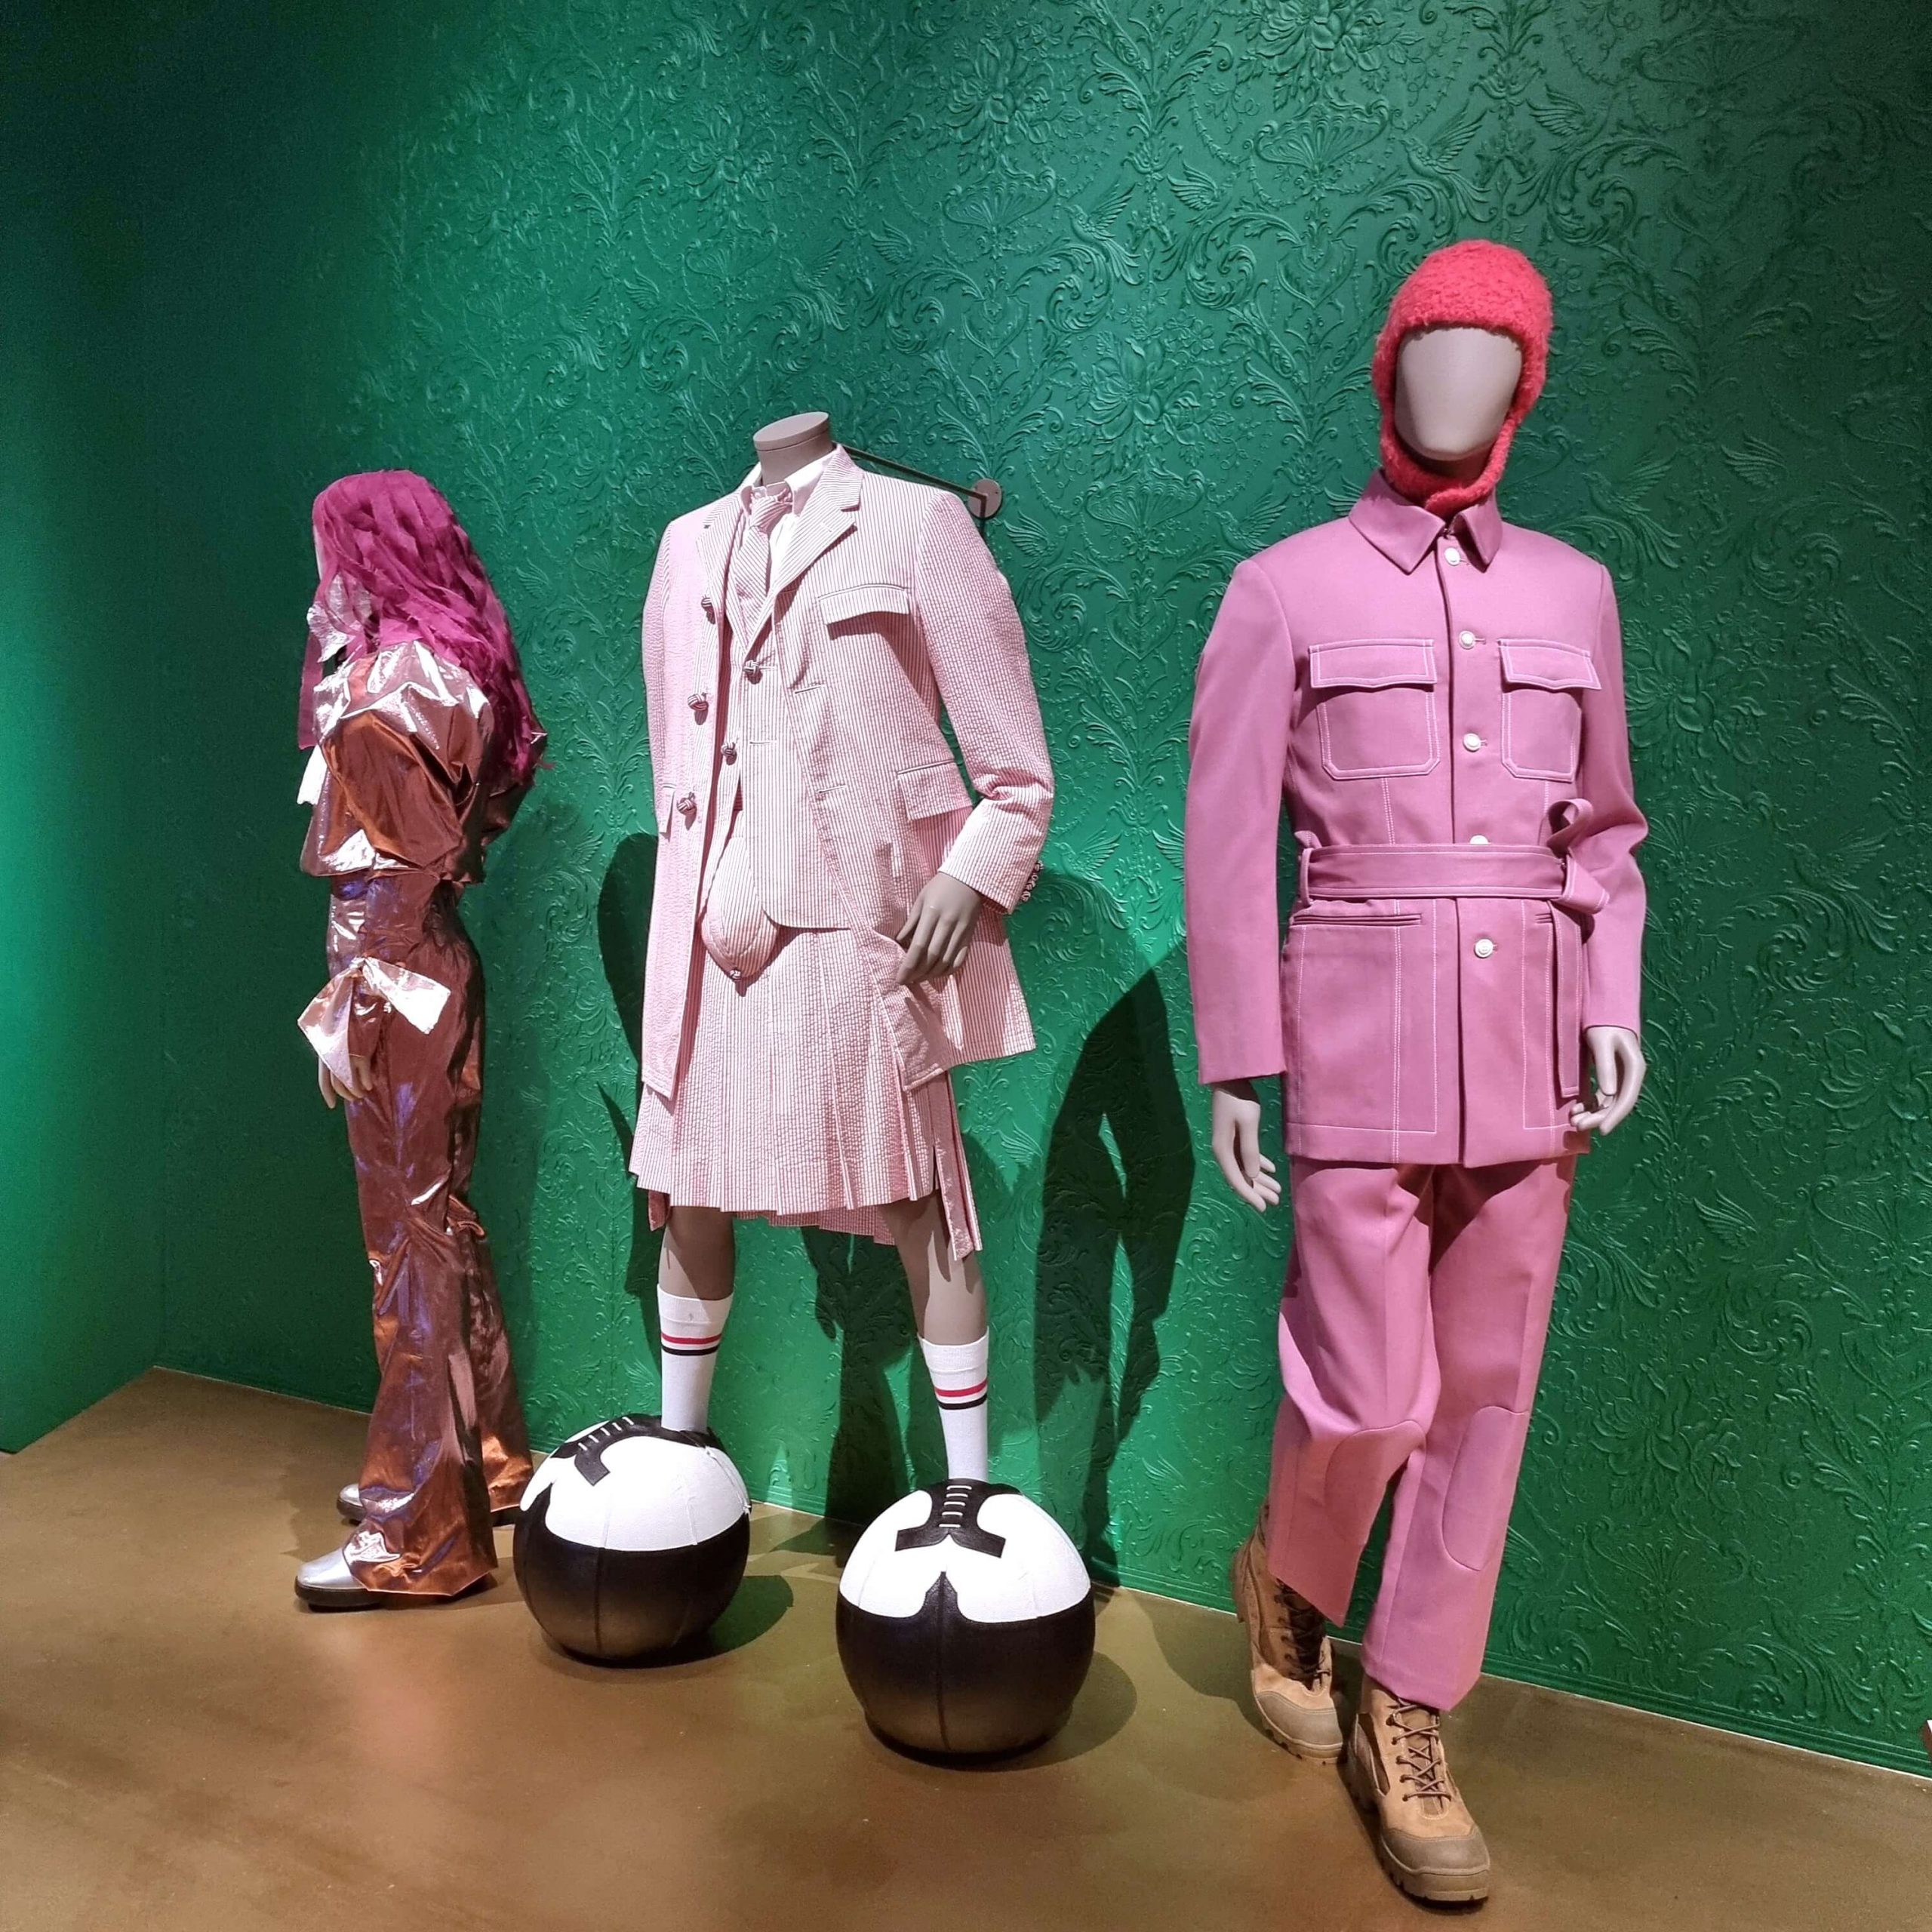 Fashioning Masculinities at the V&A Museum, London / Exhibition View / 2022